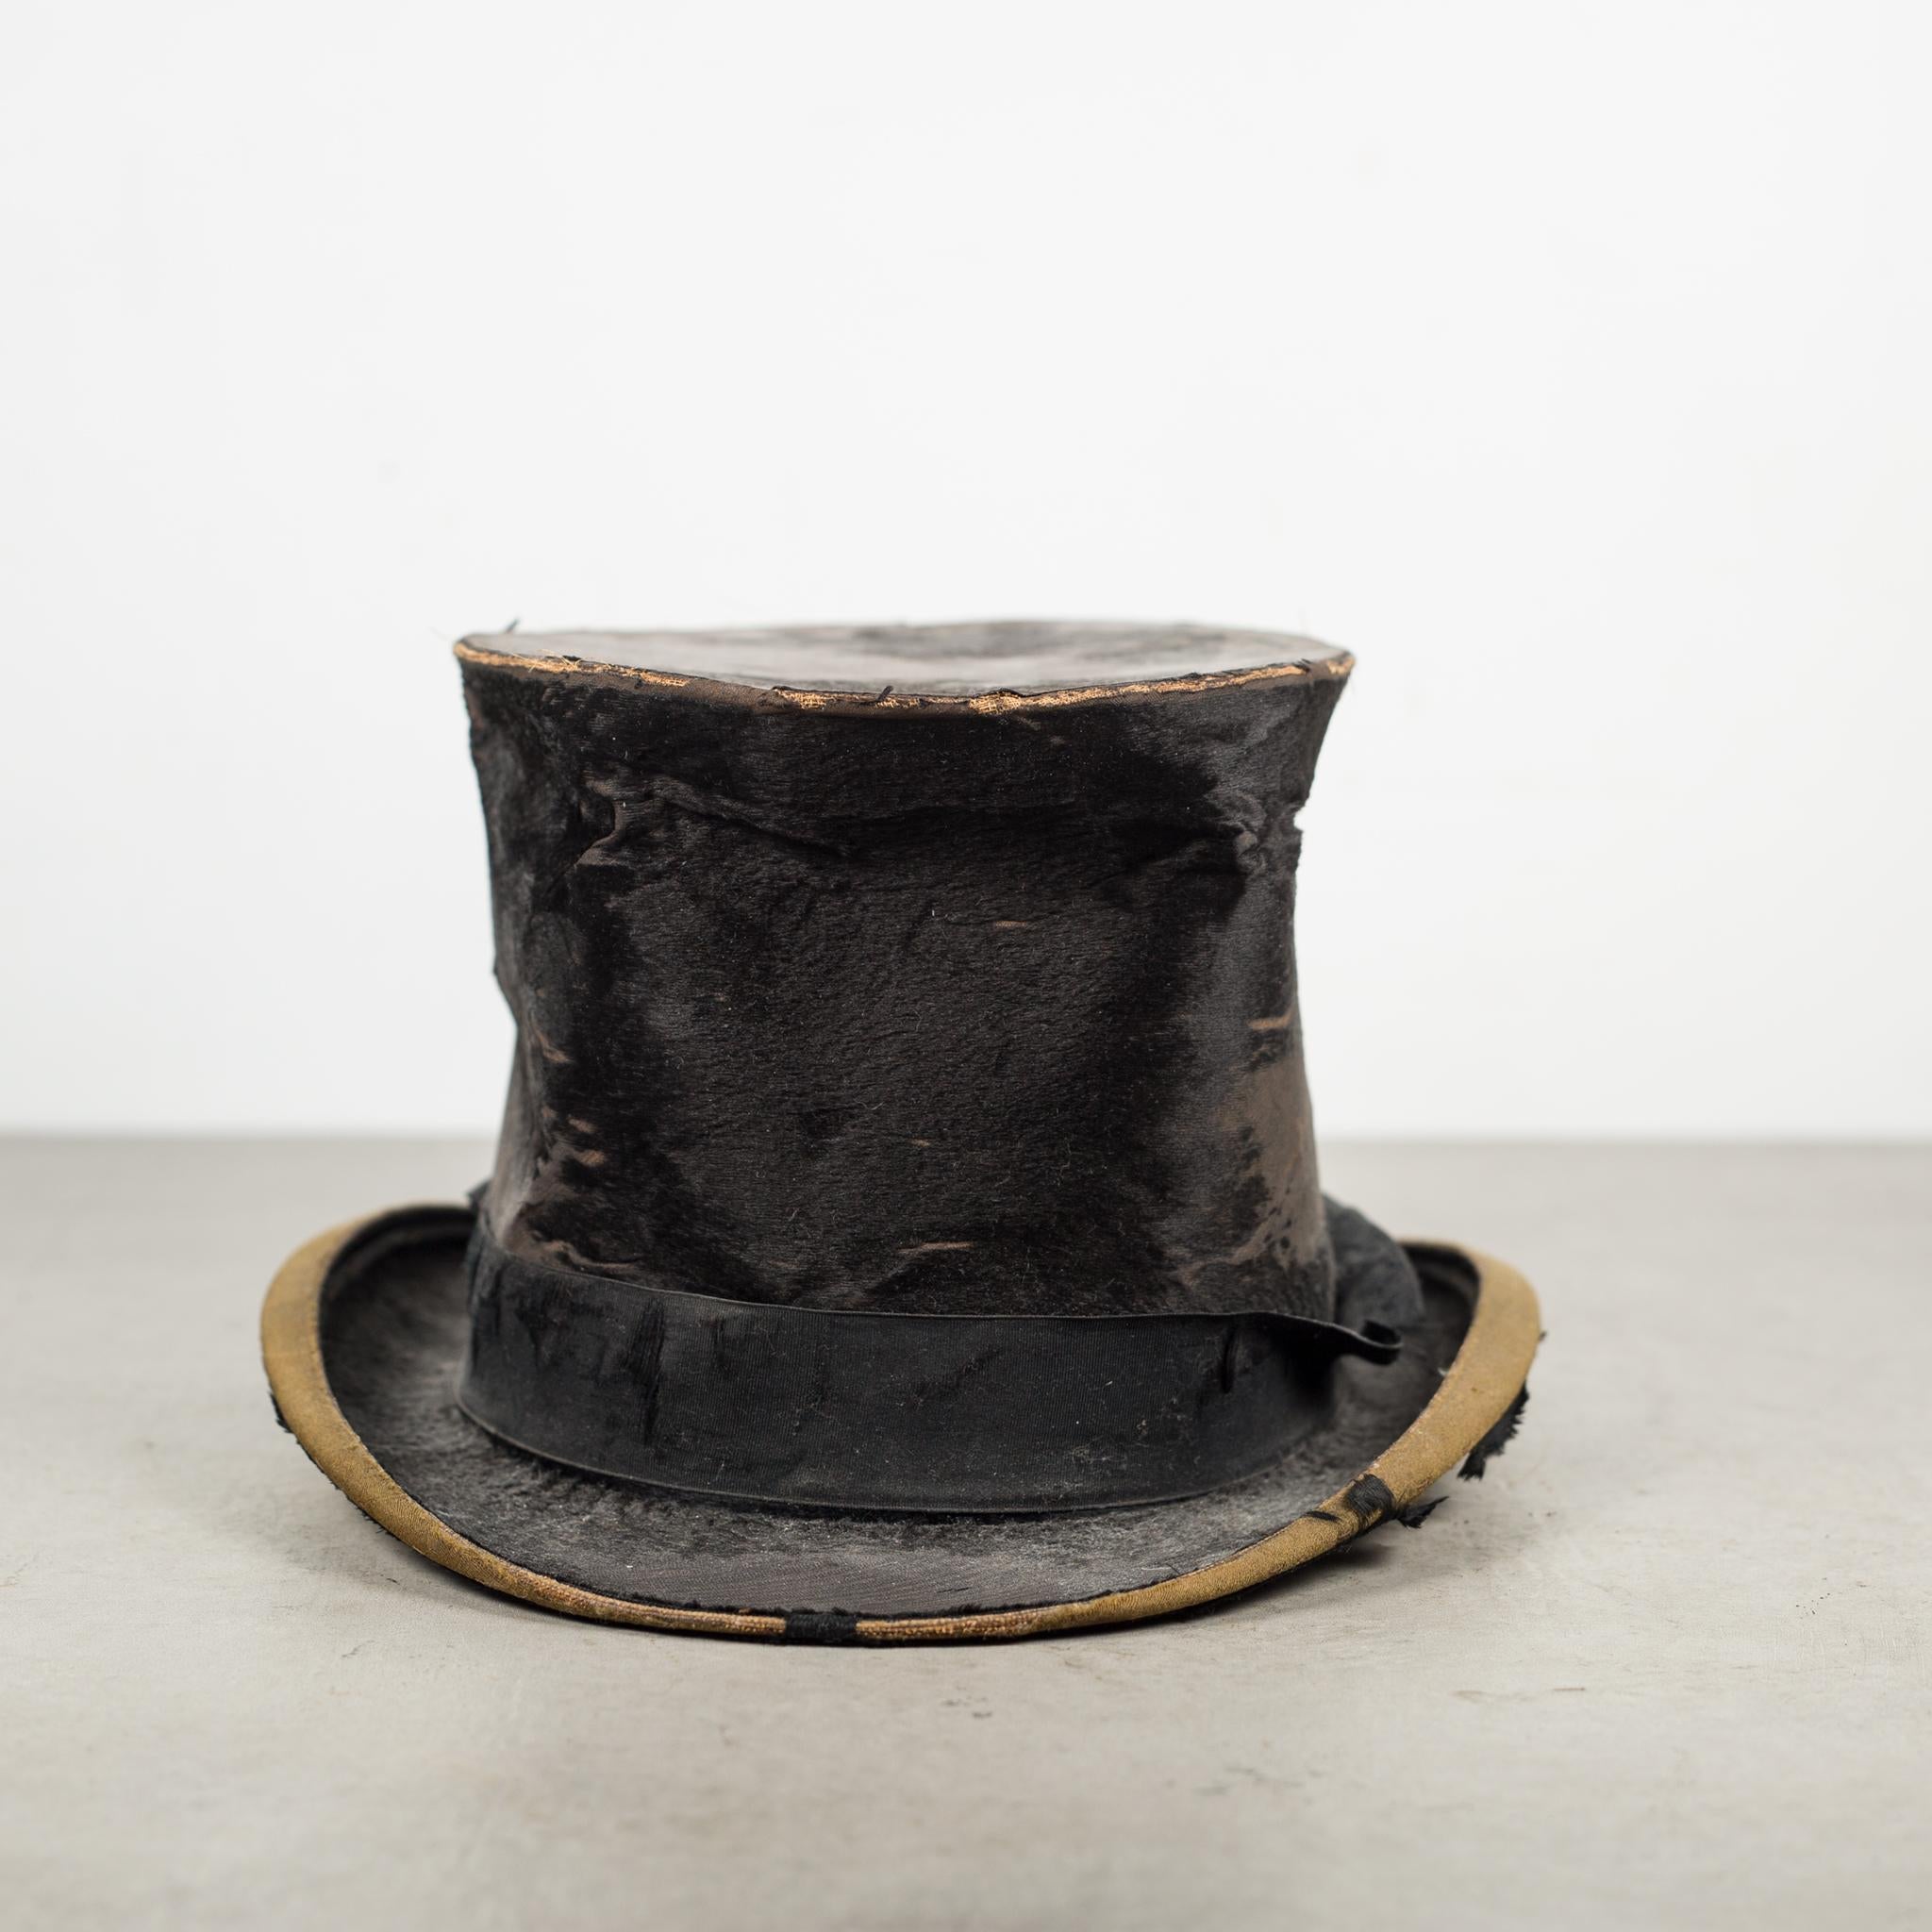 About

A distressed silk top hat.

Creator unknown.
Date of manufacture circa 1850-1900.
Materials and techniques silk.
Condition good. Wear consistent with age and use.
Dimensions hat: H 6 in., W 9.75 in., D 11.75 in., hat interior: 6.25 in